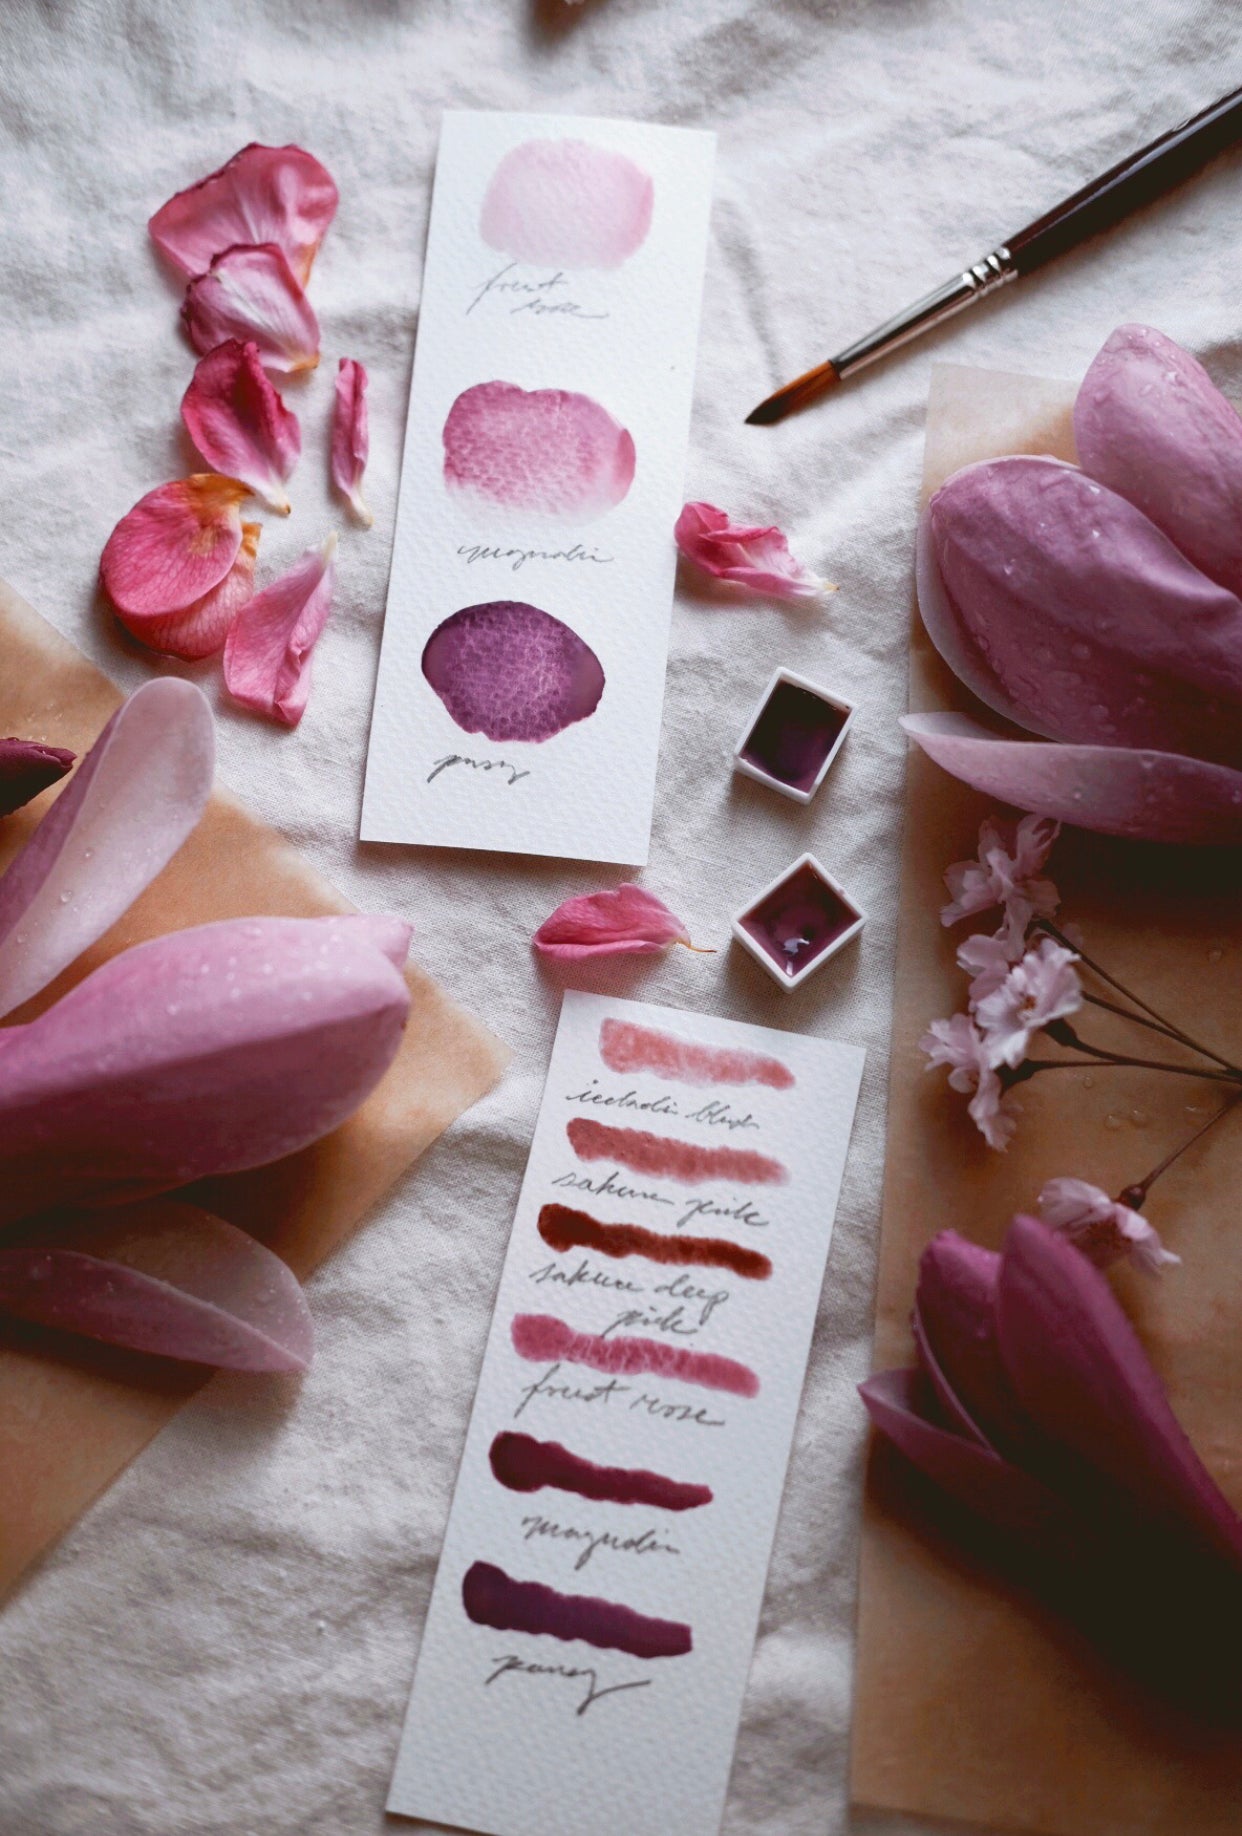 RESERVE for Arielle + Pink Blossom + Limited edition gemstone watercolor palette